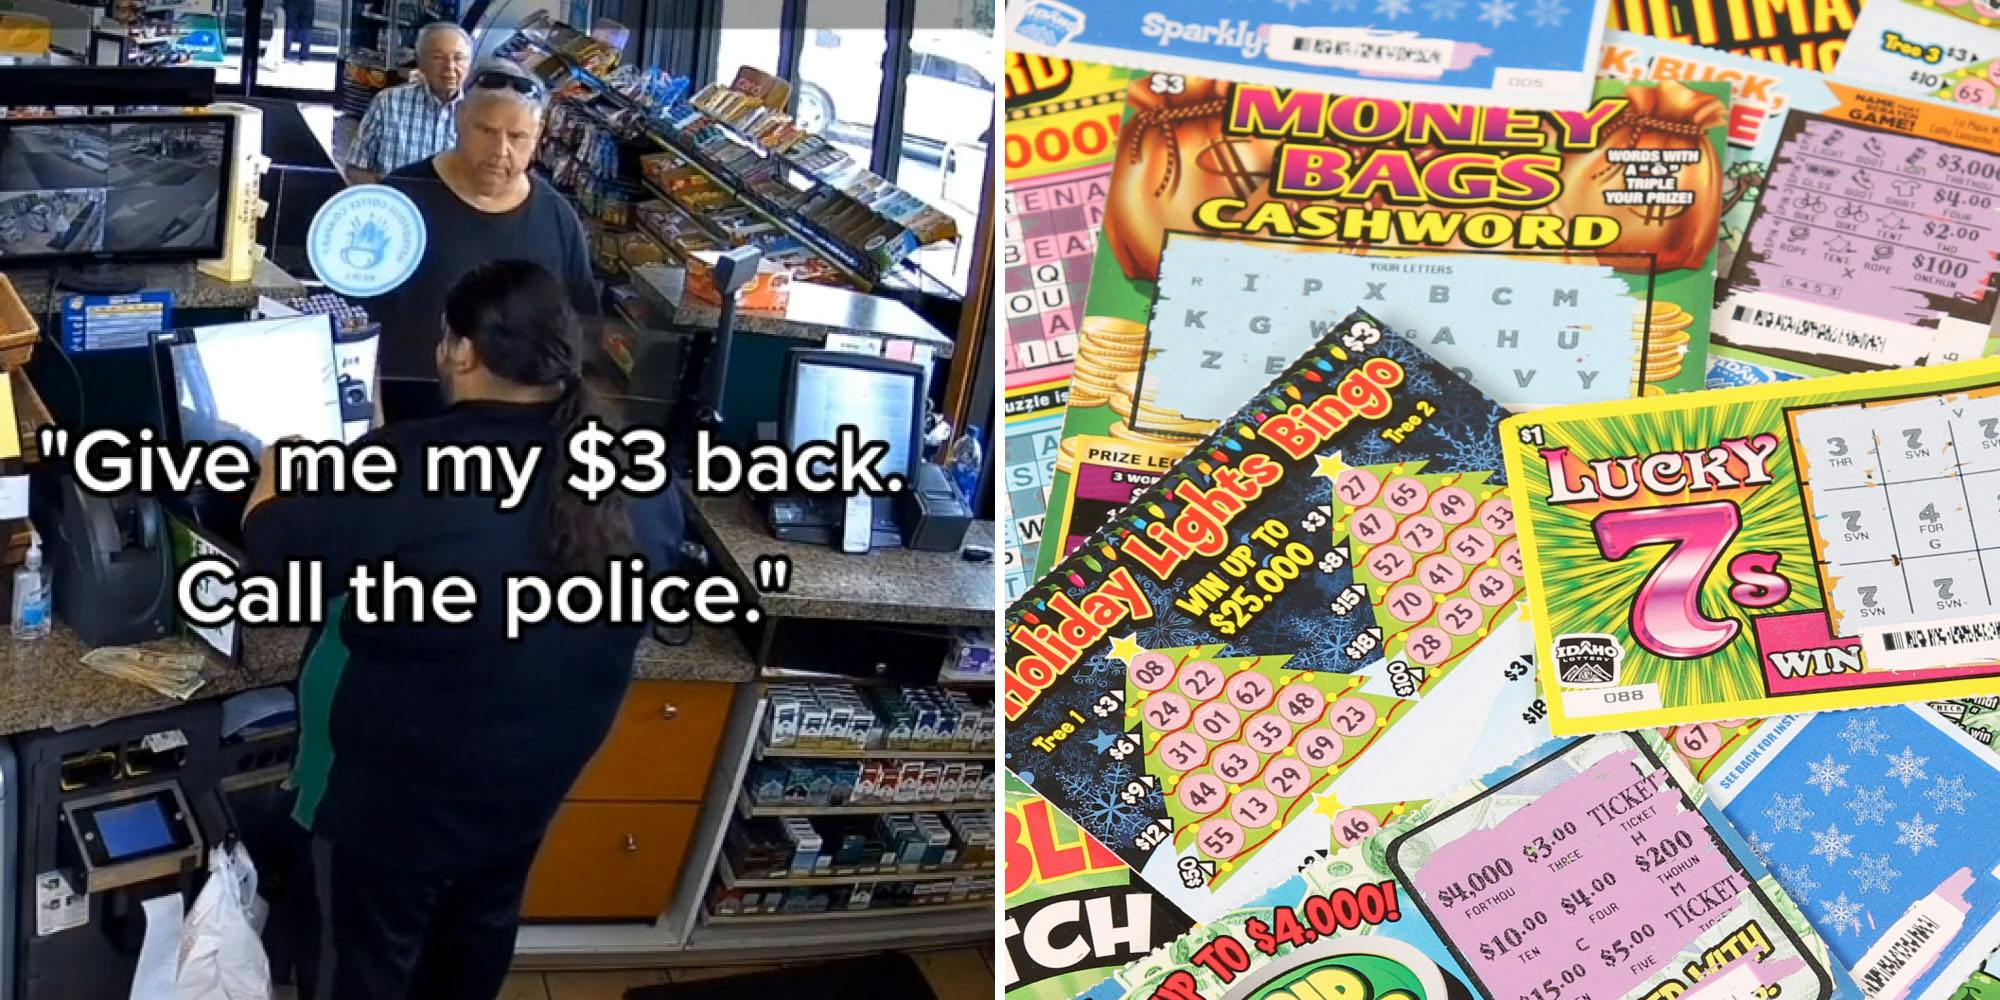 Gas station cashier and customer arguing caption ""Give me my $3 back. Call the police."" (l) cheap lottery tickets scattered (r)